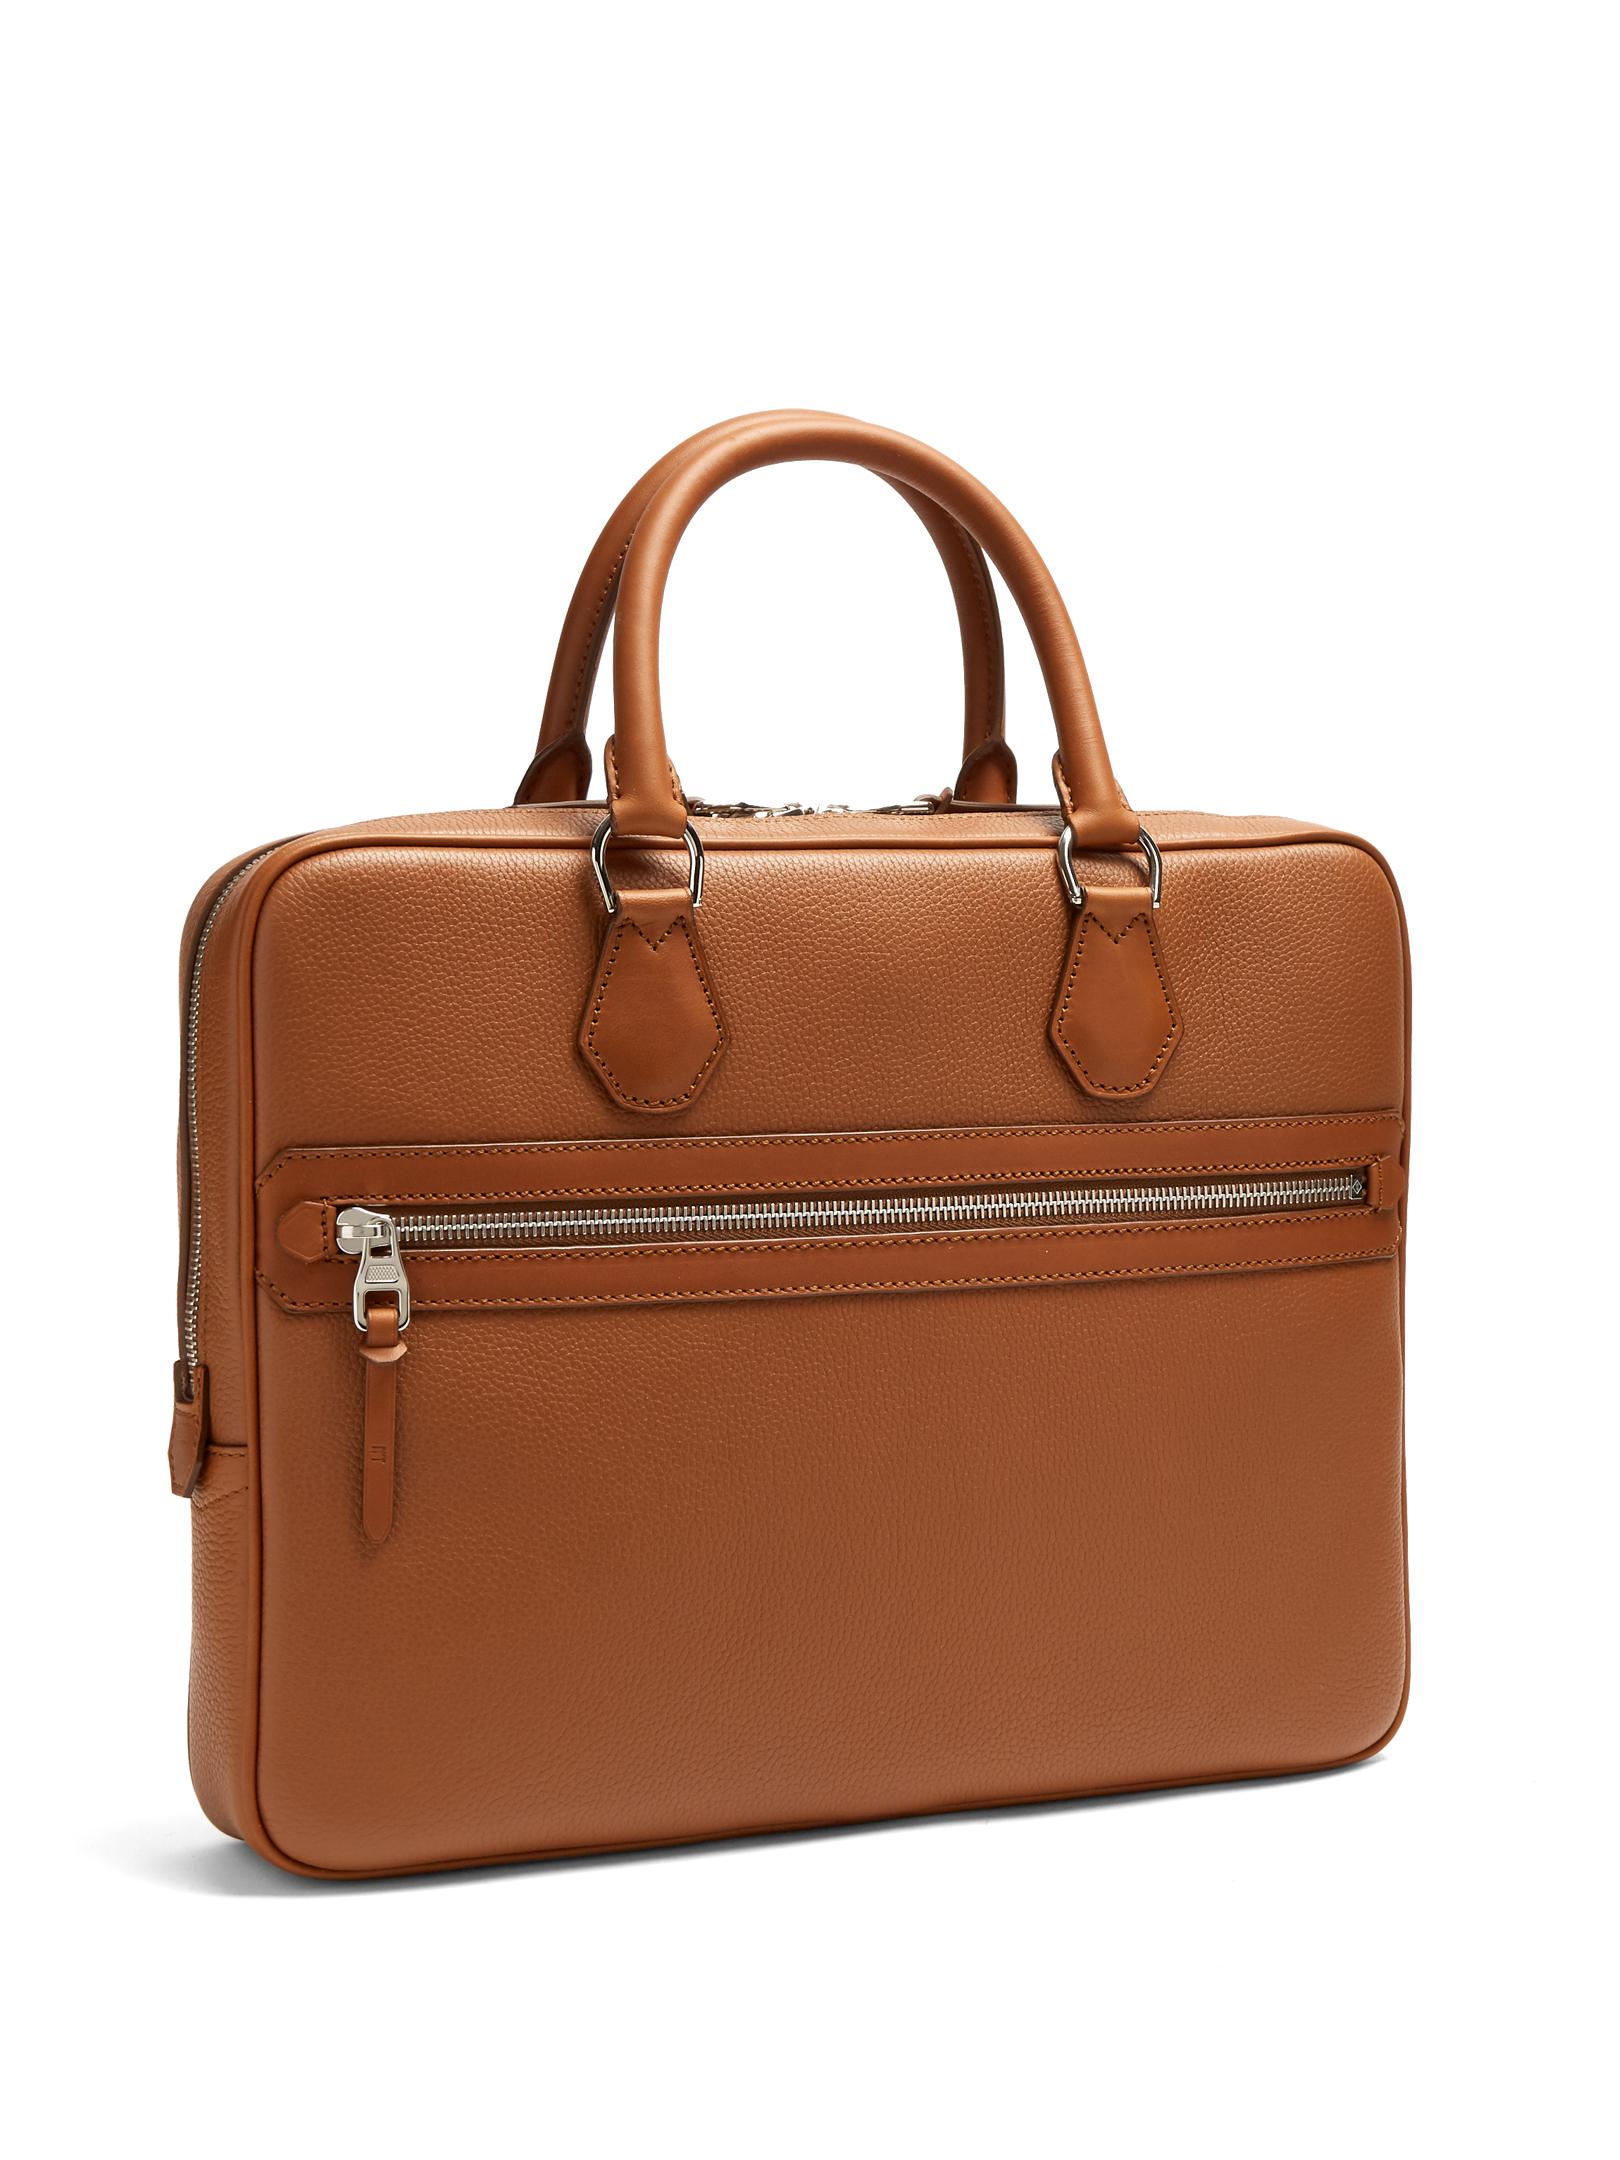 Lyst - Dunhill Boston Leather Briefcase in Brown for Men